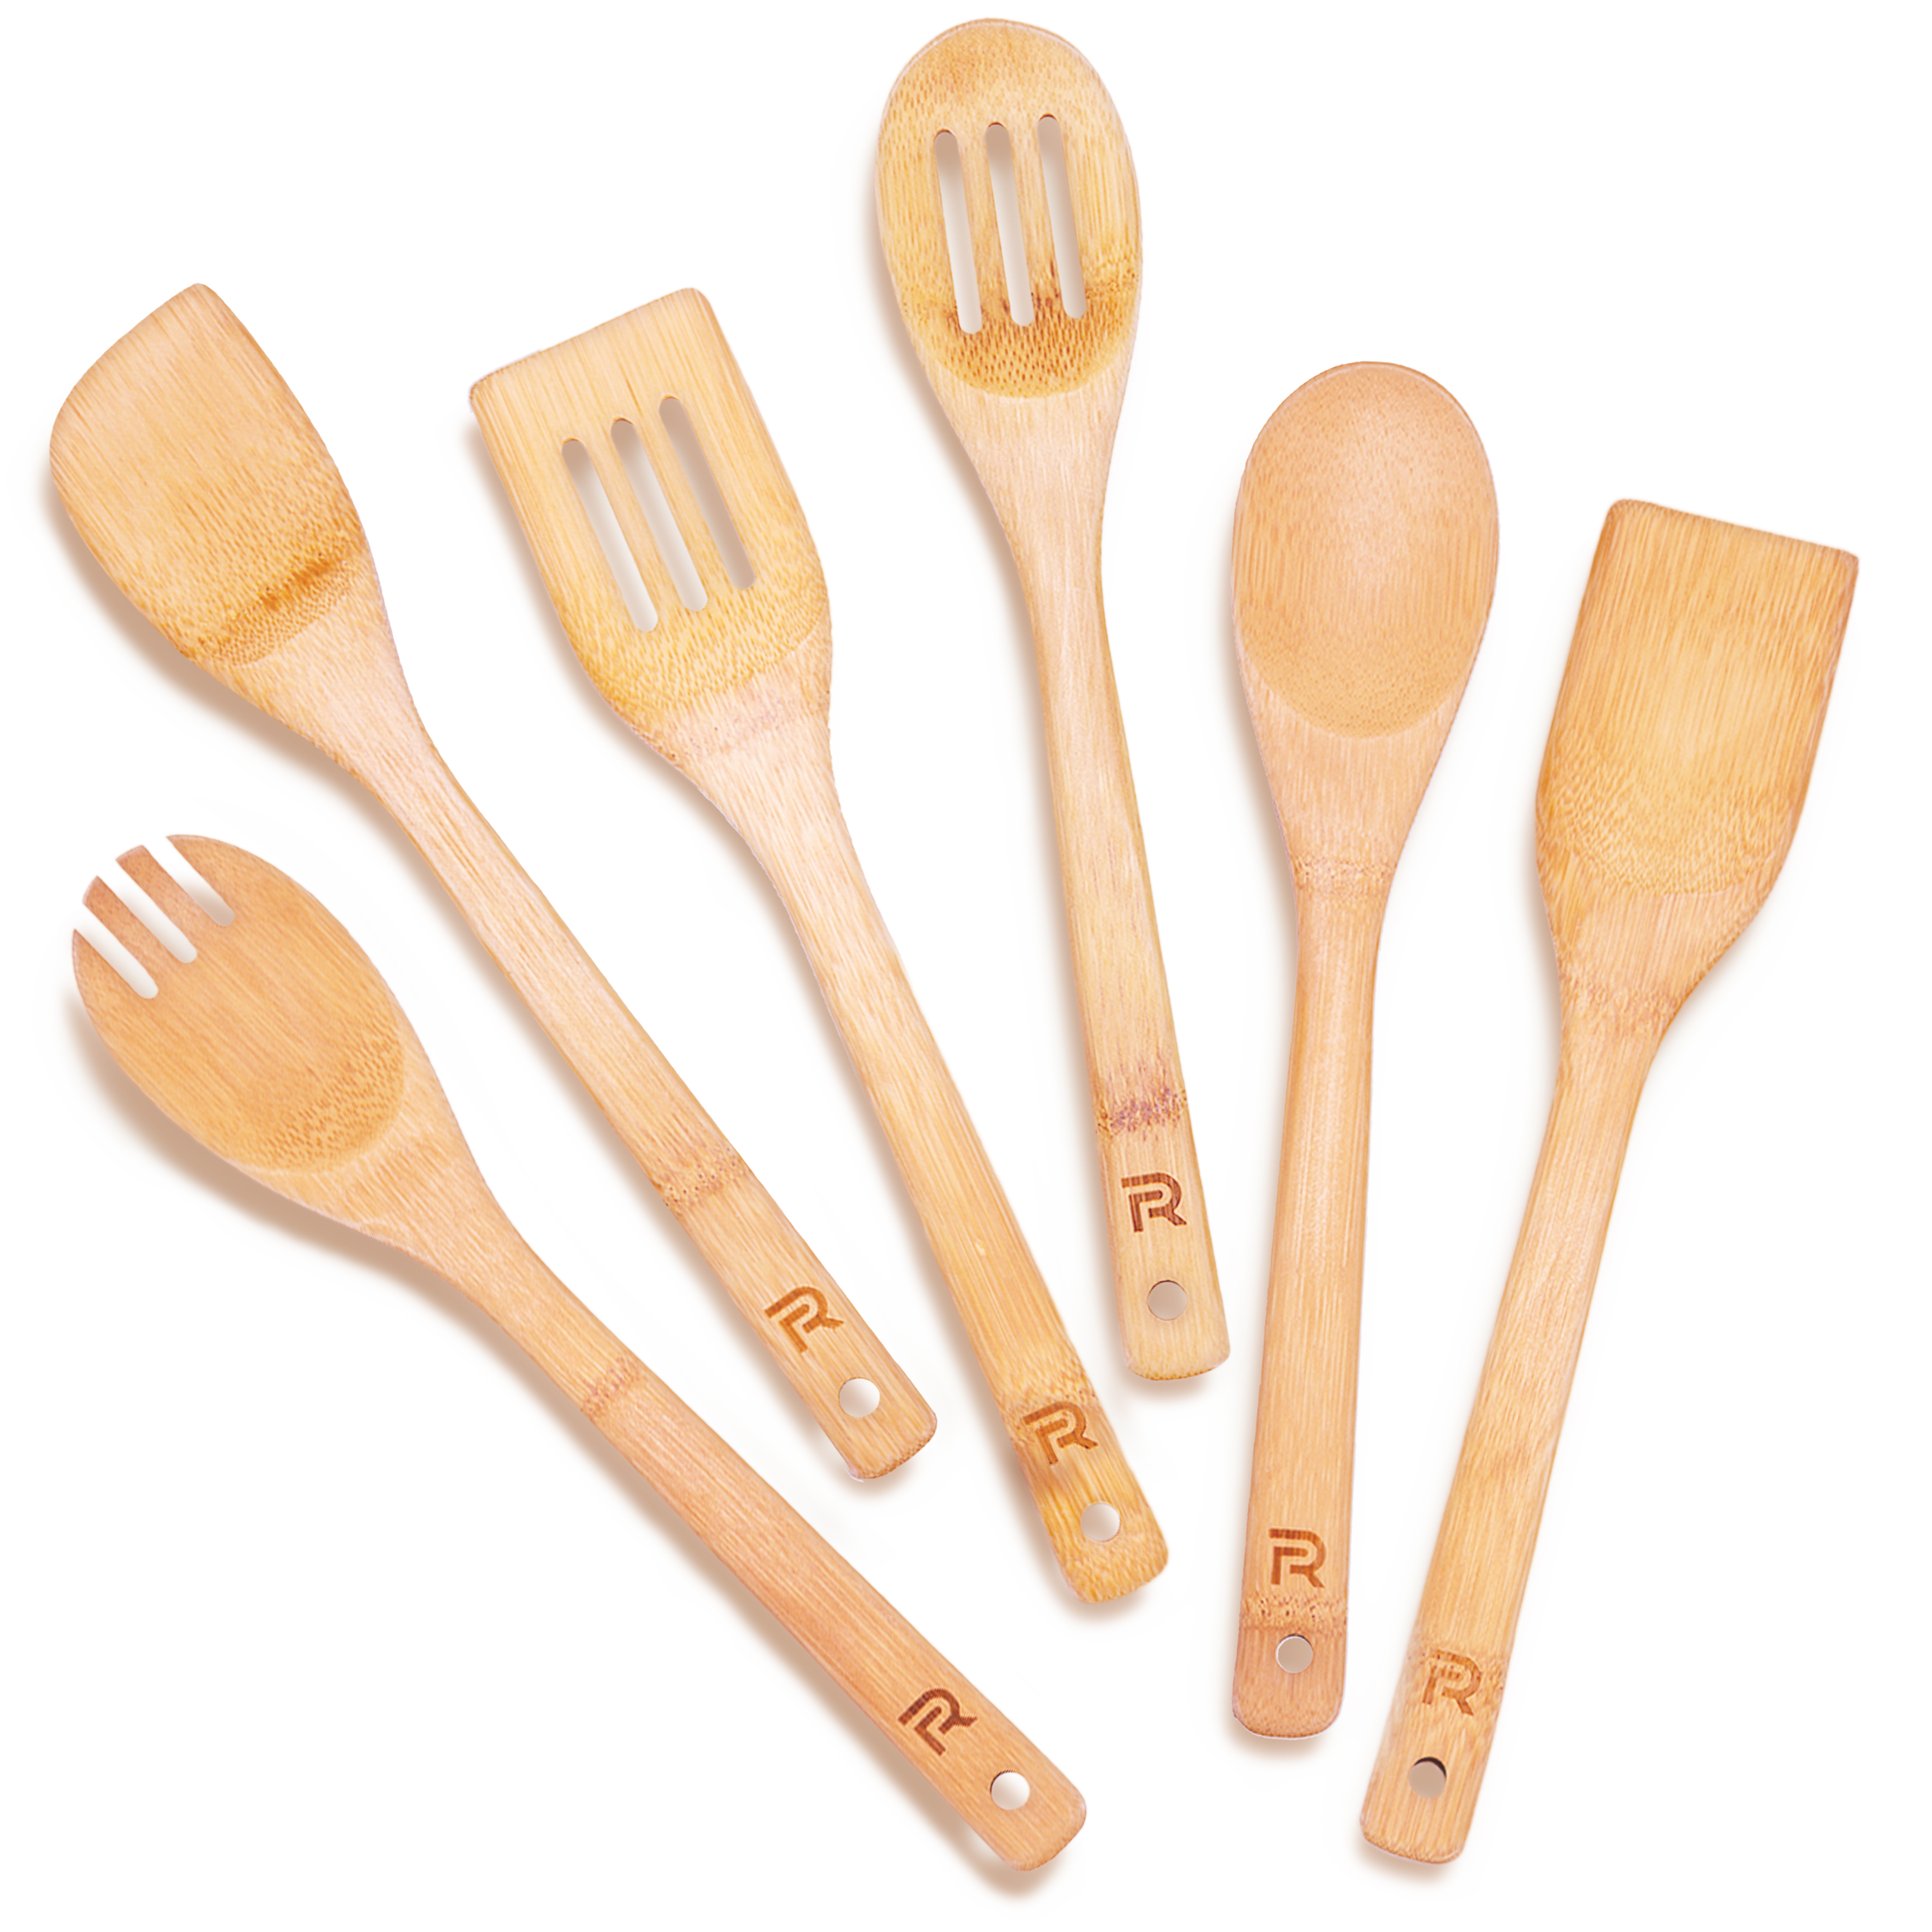  Riveira Bamboo Wooden Spoons for Cooking 6-Piece , Apartment  Essentials Wood Spatula Spoon Nonstick Kitchen Utensil Set Premium Quality  Housewarming Gifts for Everyday Use: Home & Kitchen